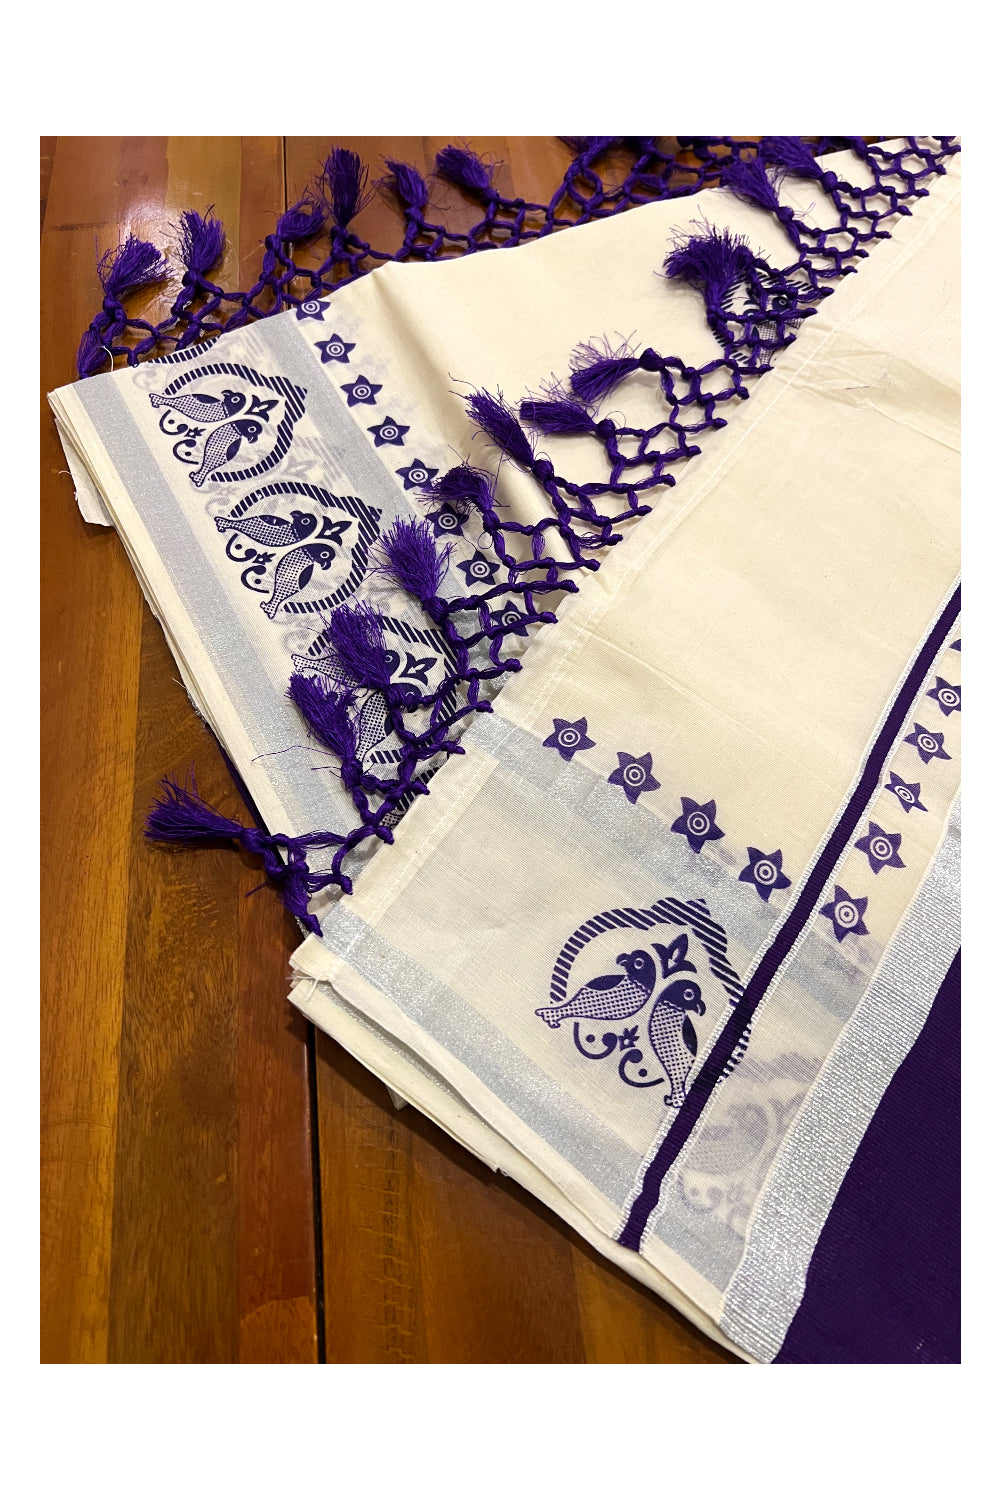 Pure Cotton Kerala Saree with Silver Kasavu Violet Block Prints on Border and Tassels Works